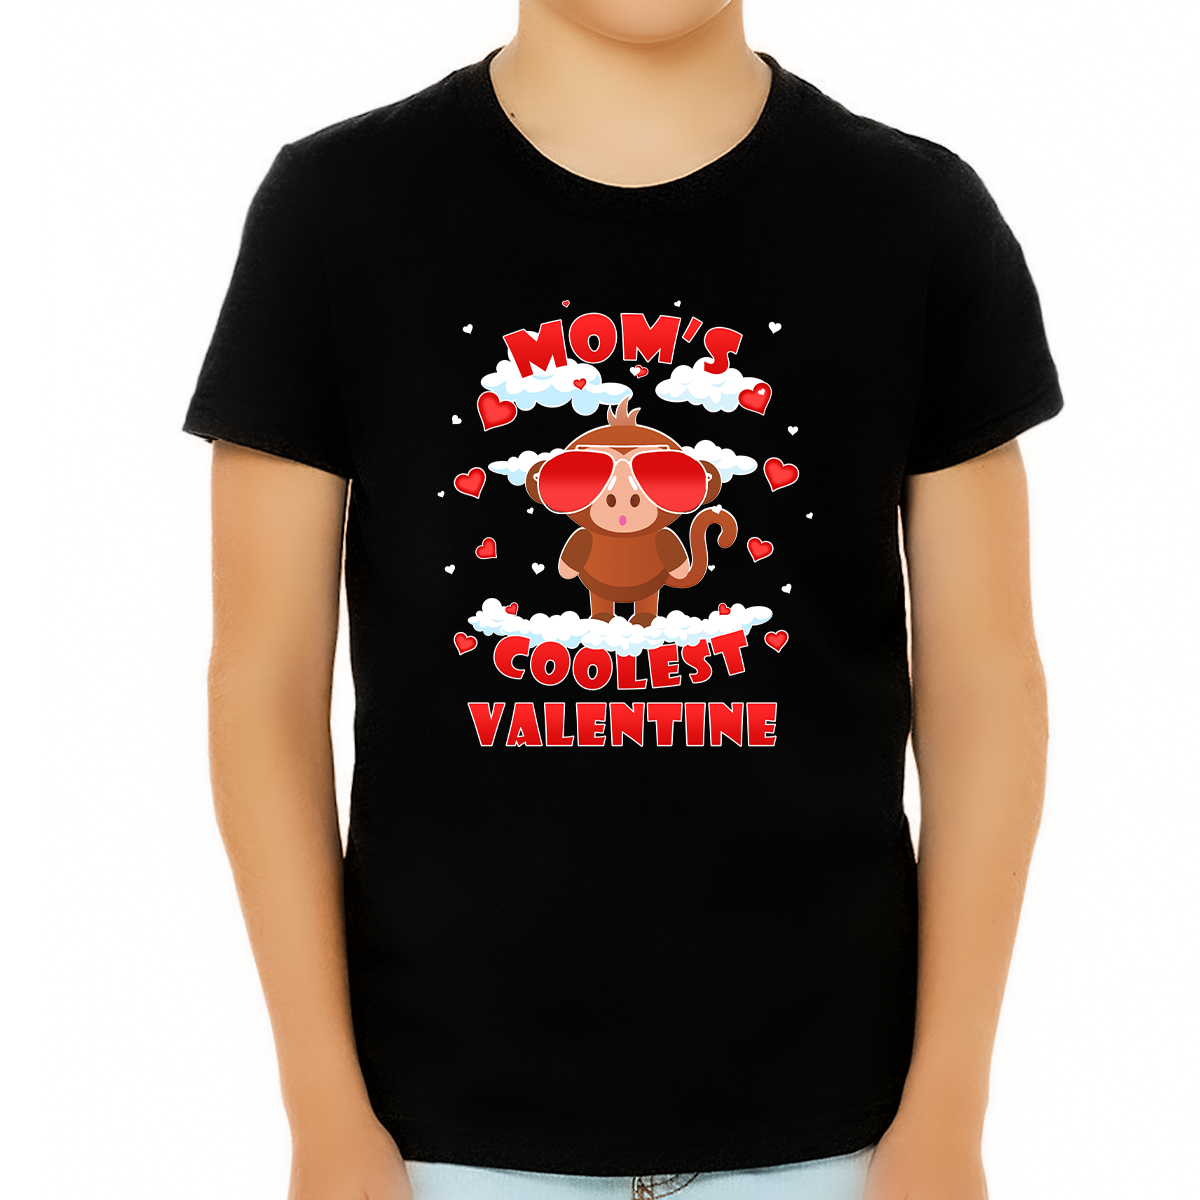 Fire Fit Designs Boys Valentines Day Shirts Valentine's Day Hearts Love Kids Shirt Cool Valentines Day Gifts for Kids